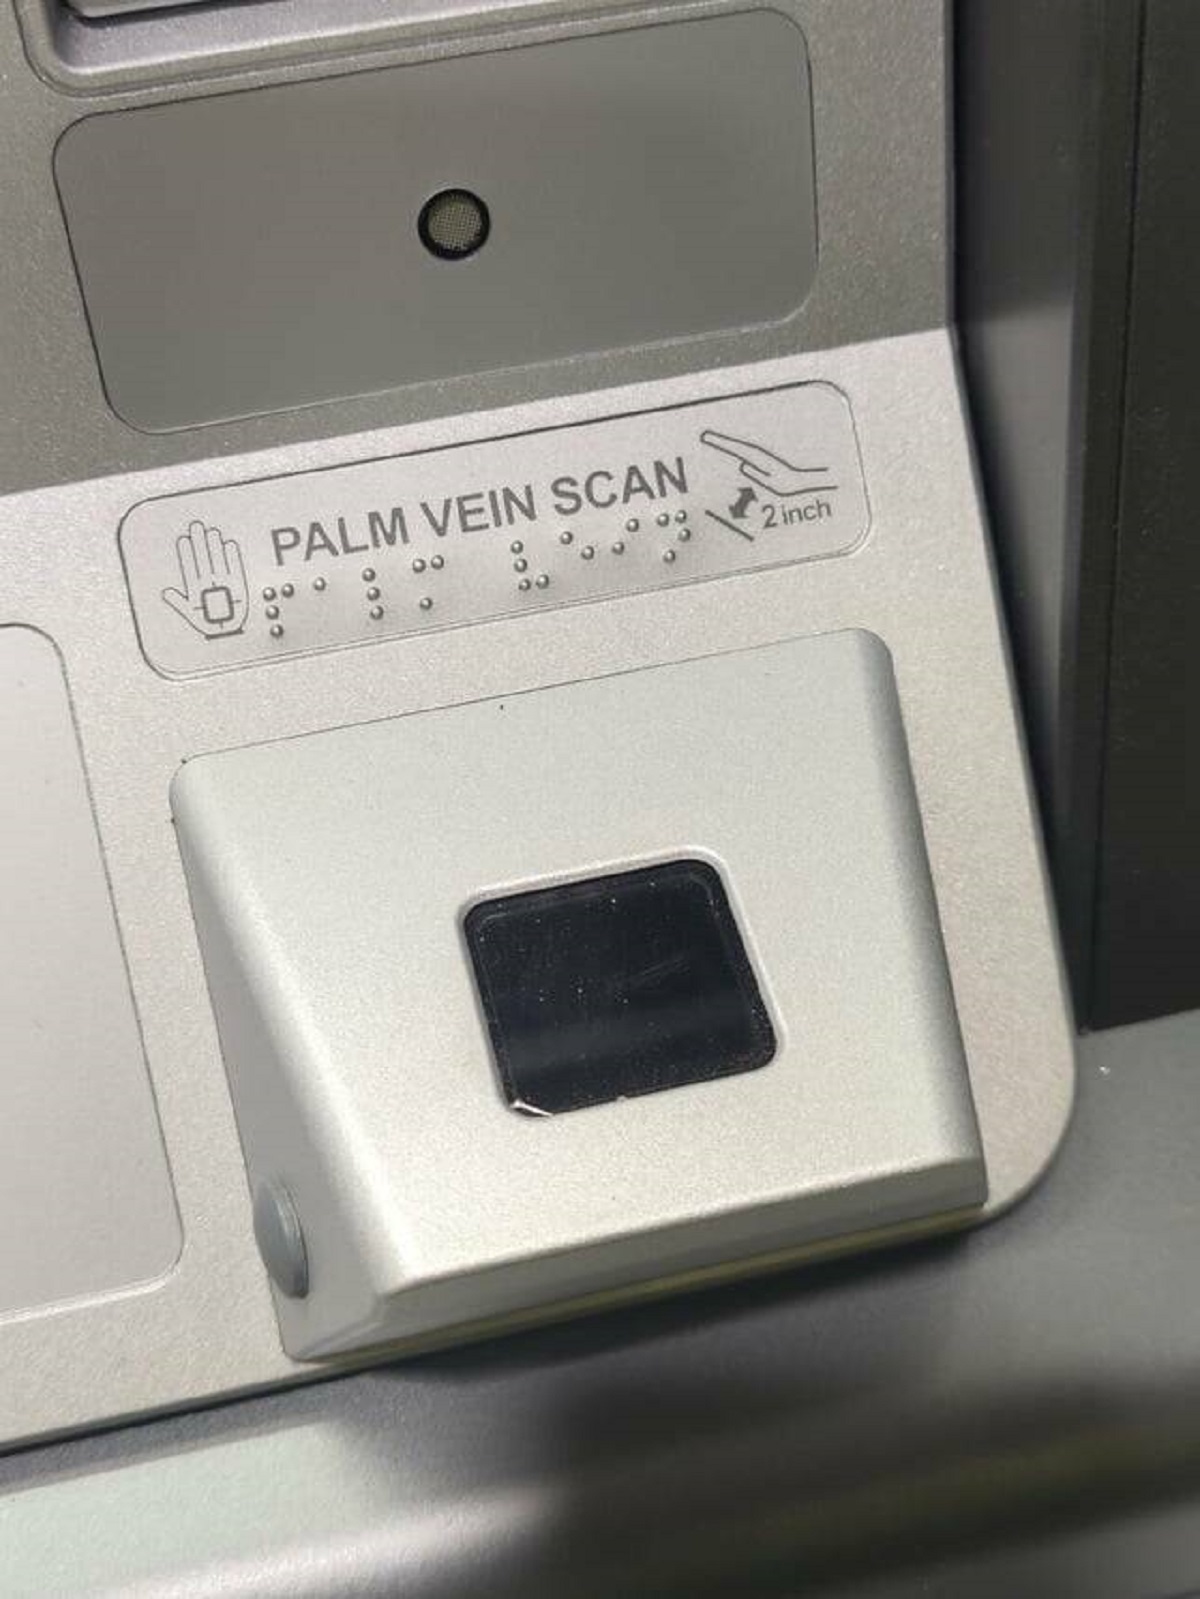 "This ATM has a palm vein scanner"